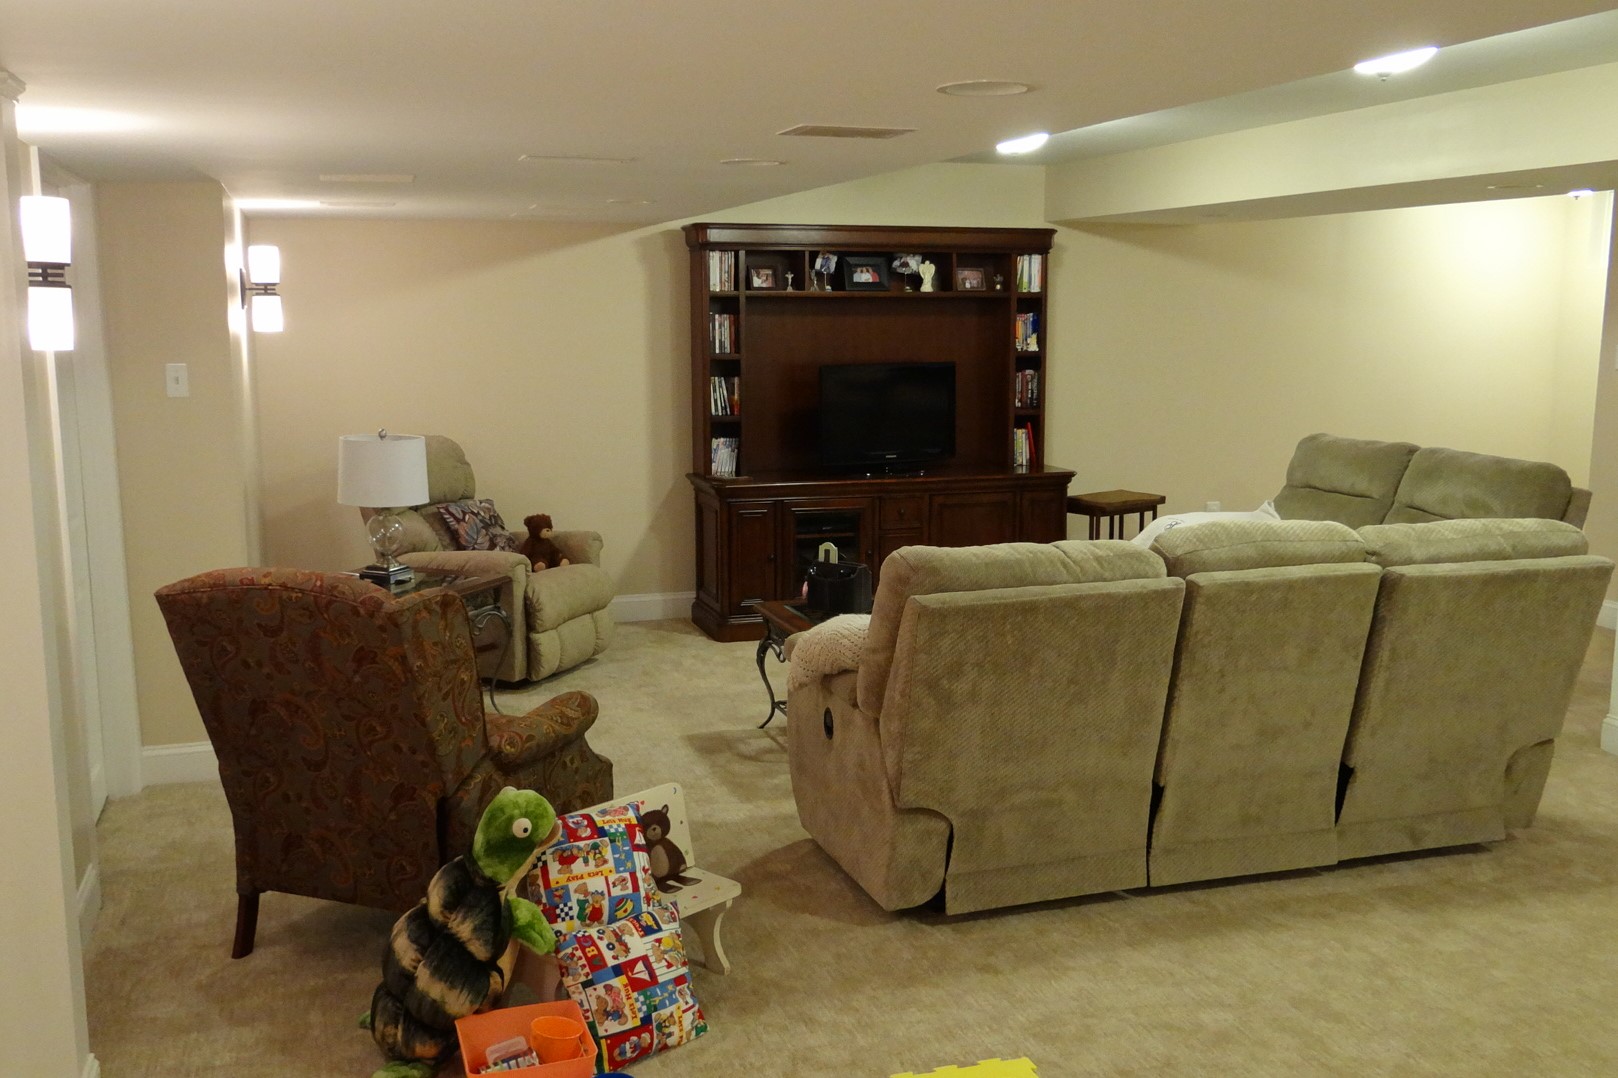 a finished basement in chester springs, pa 19425 finished by deluca construction